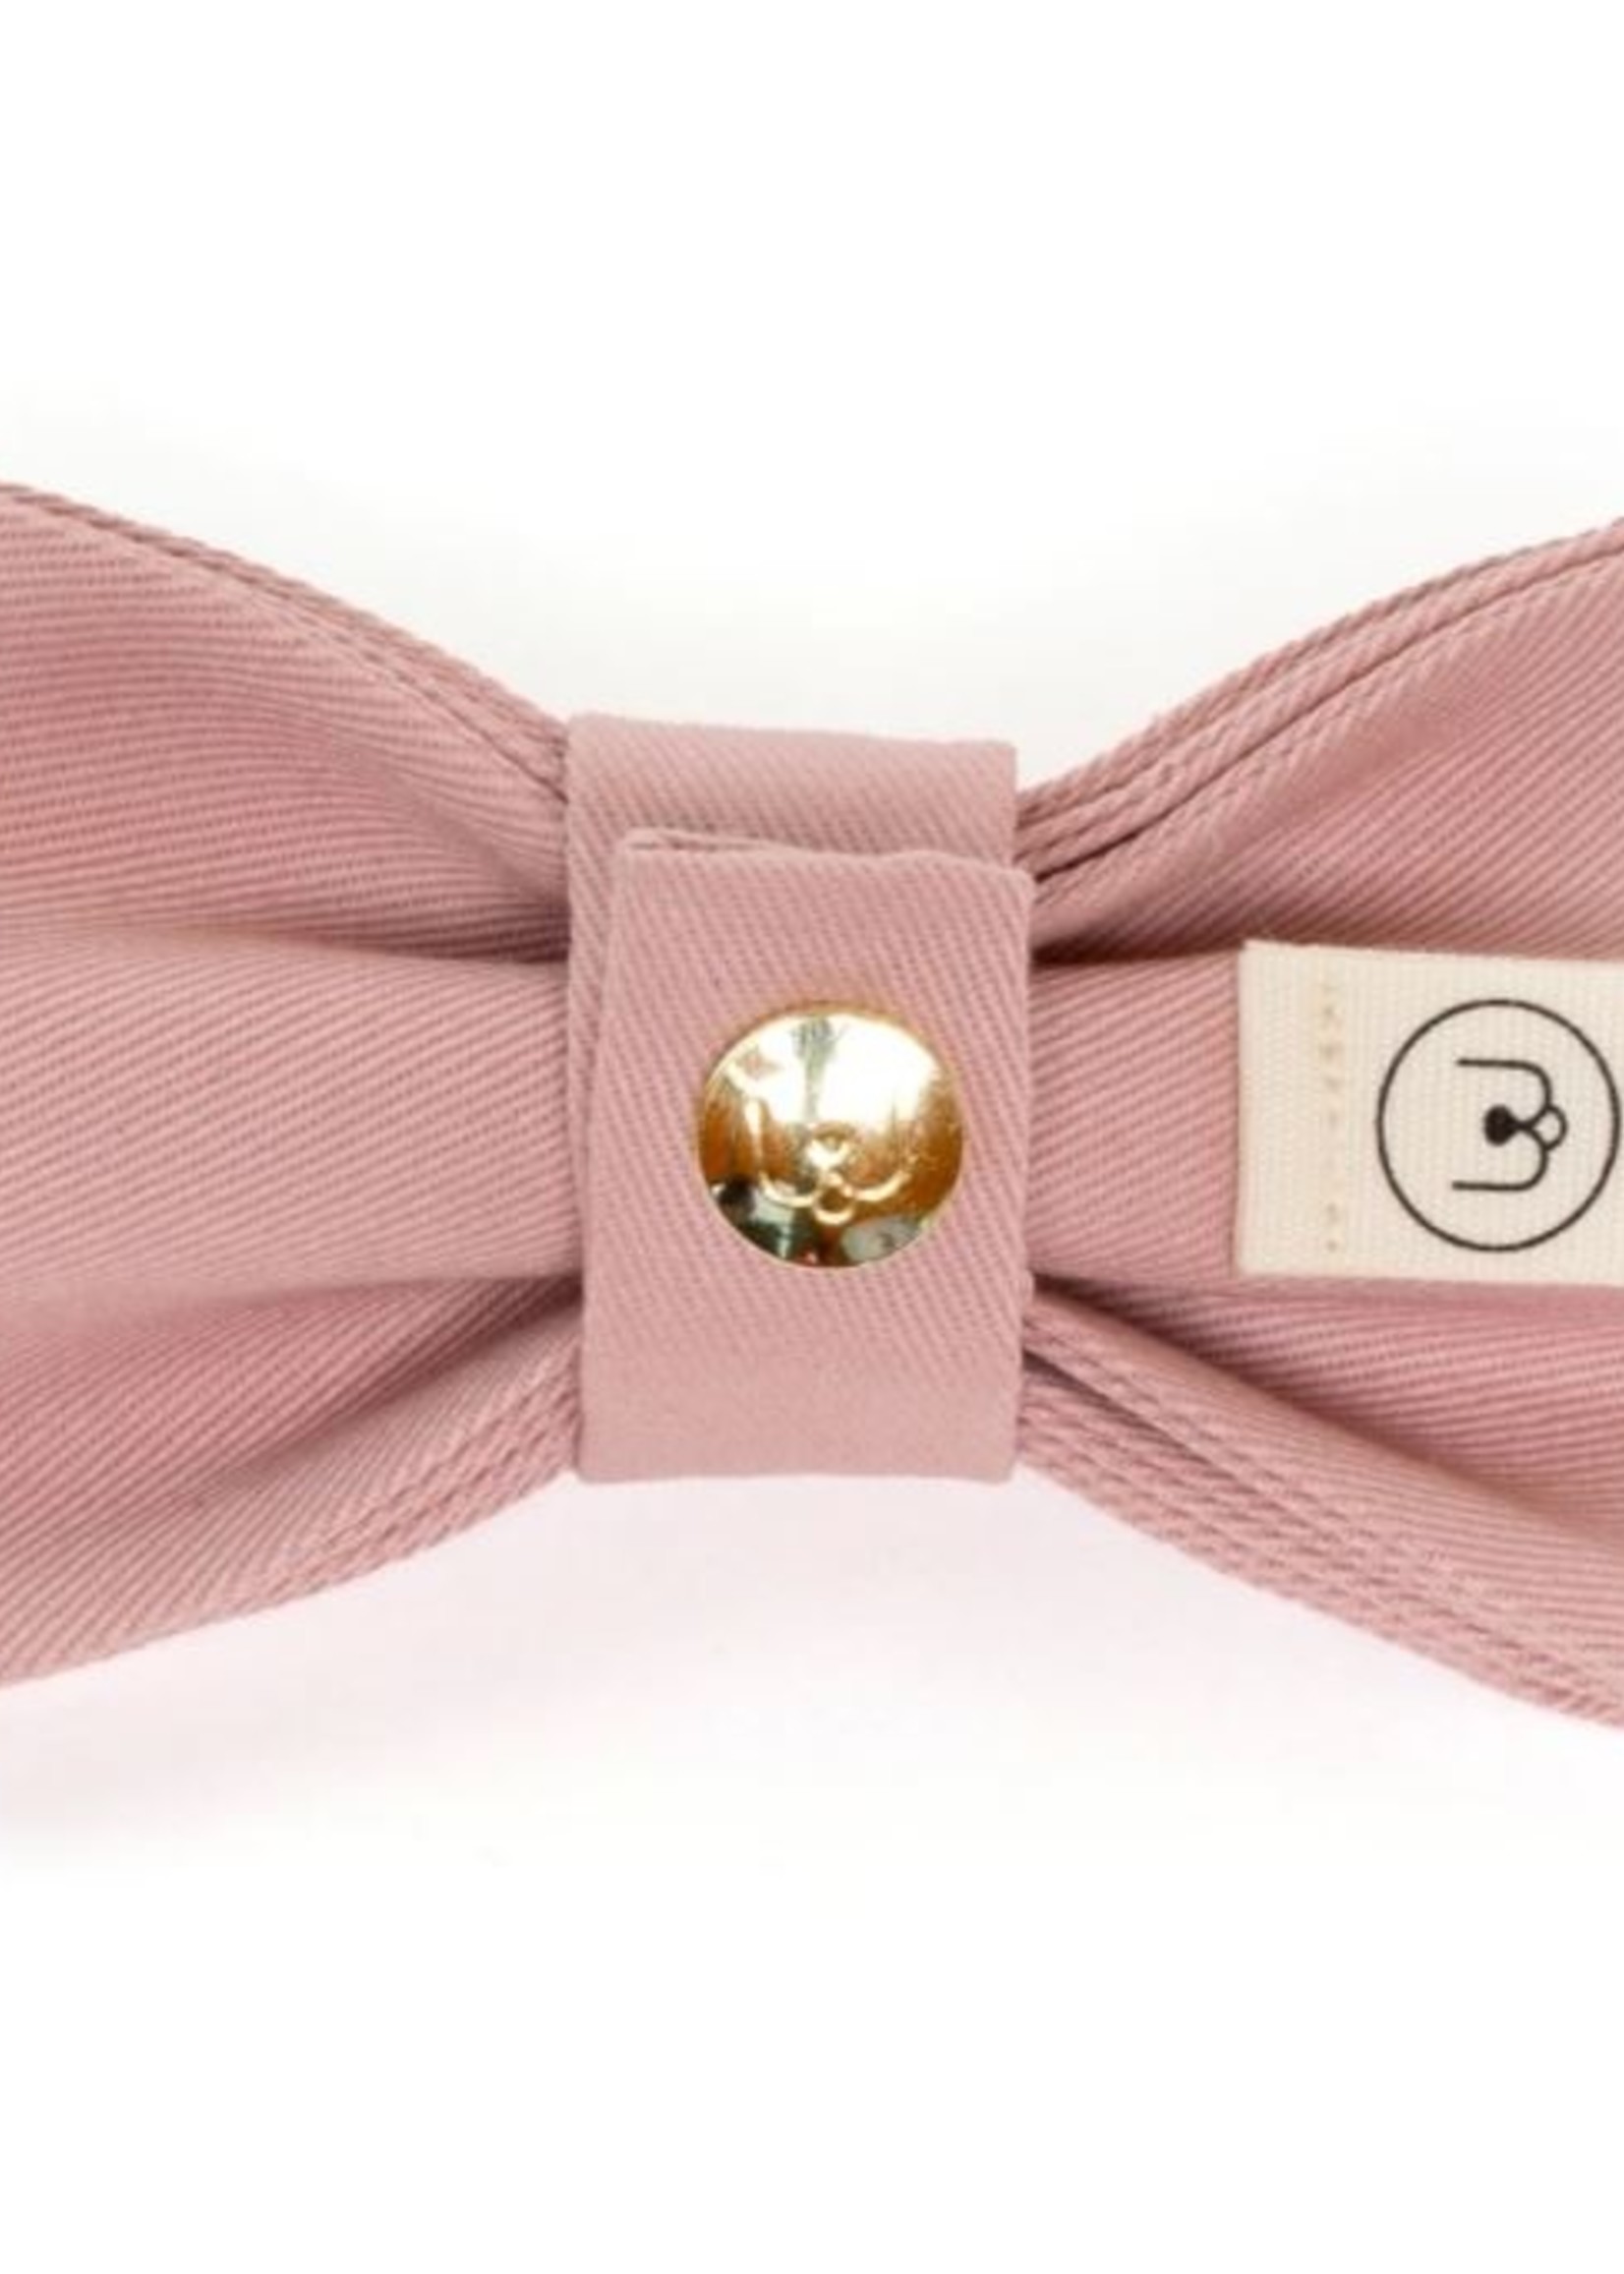 Eat Play Wag Eat Play Wag - Rose Bow Tie